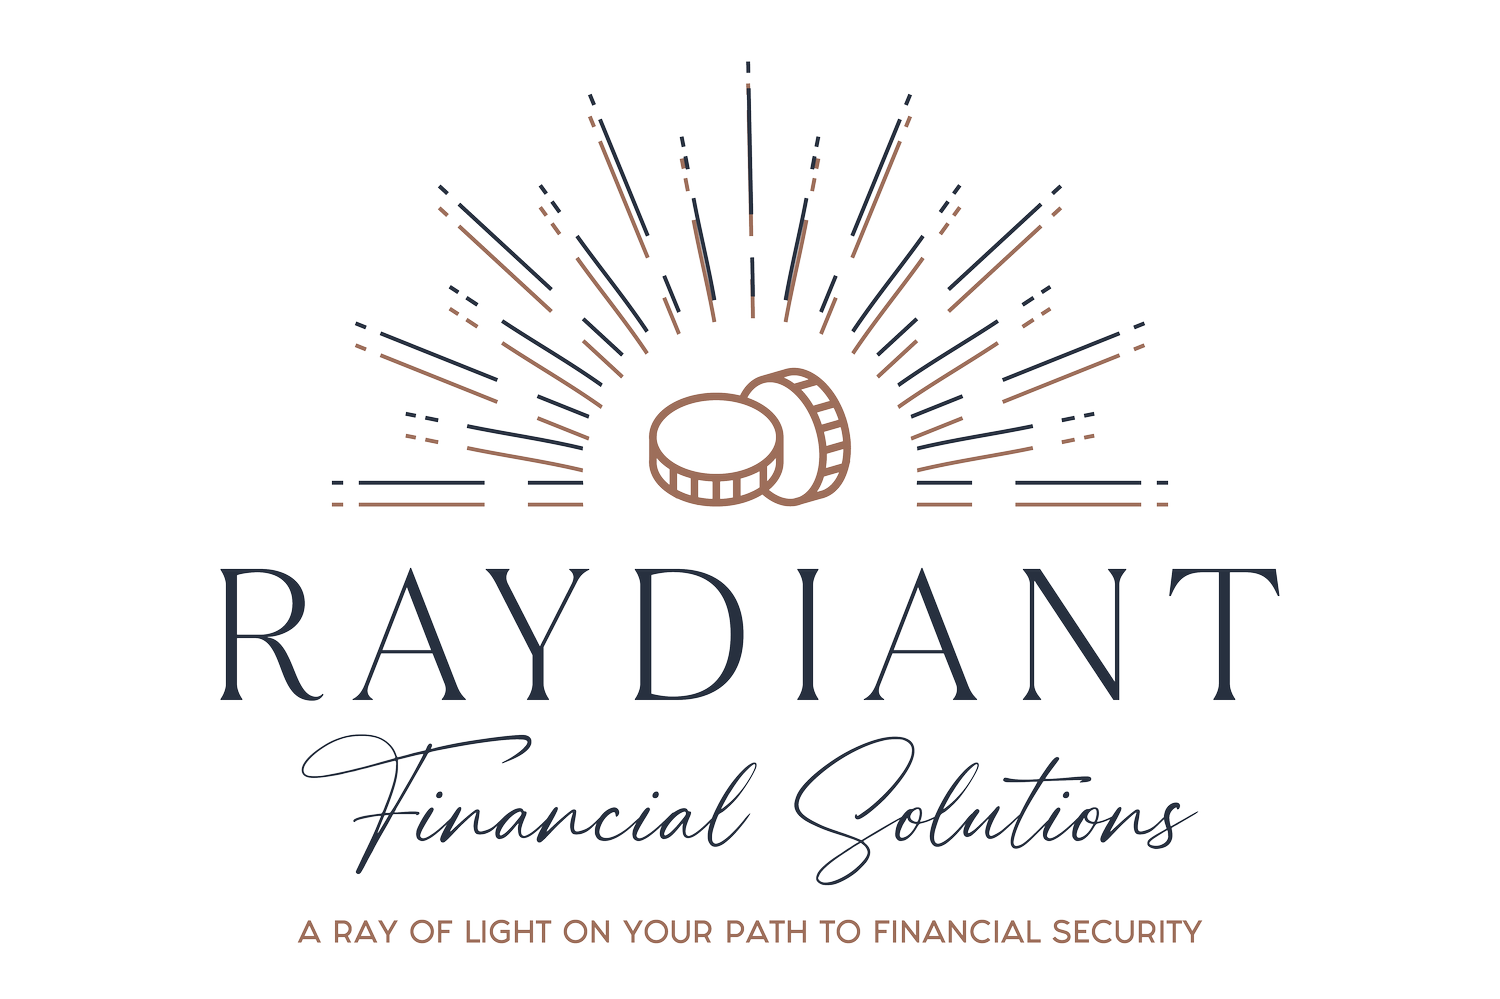  Raydiant Financial Solutions